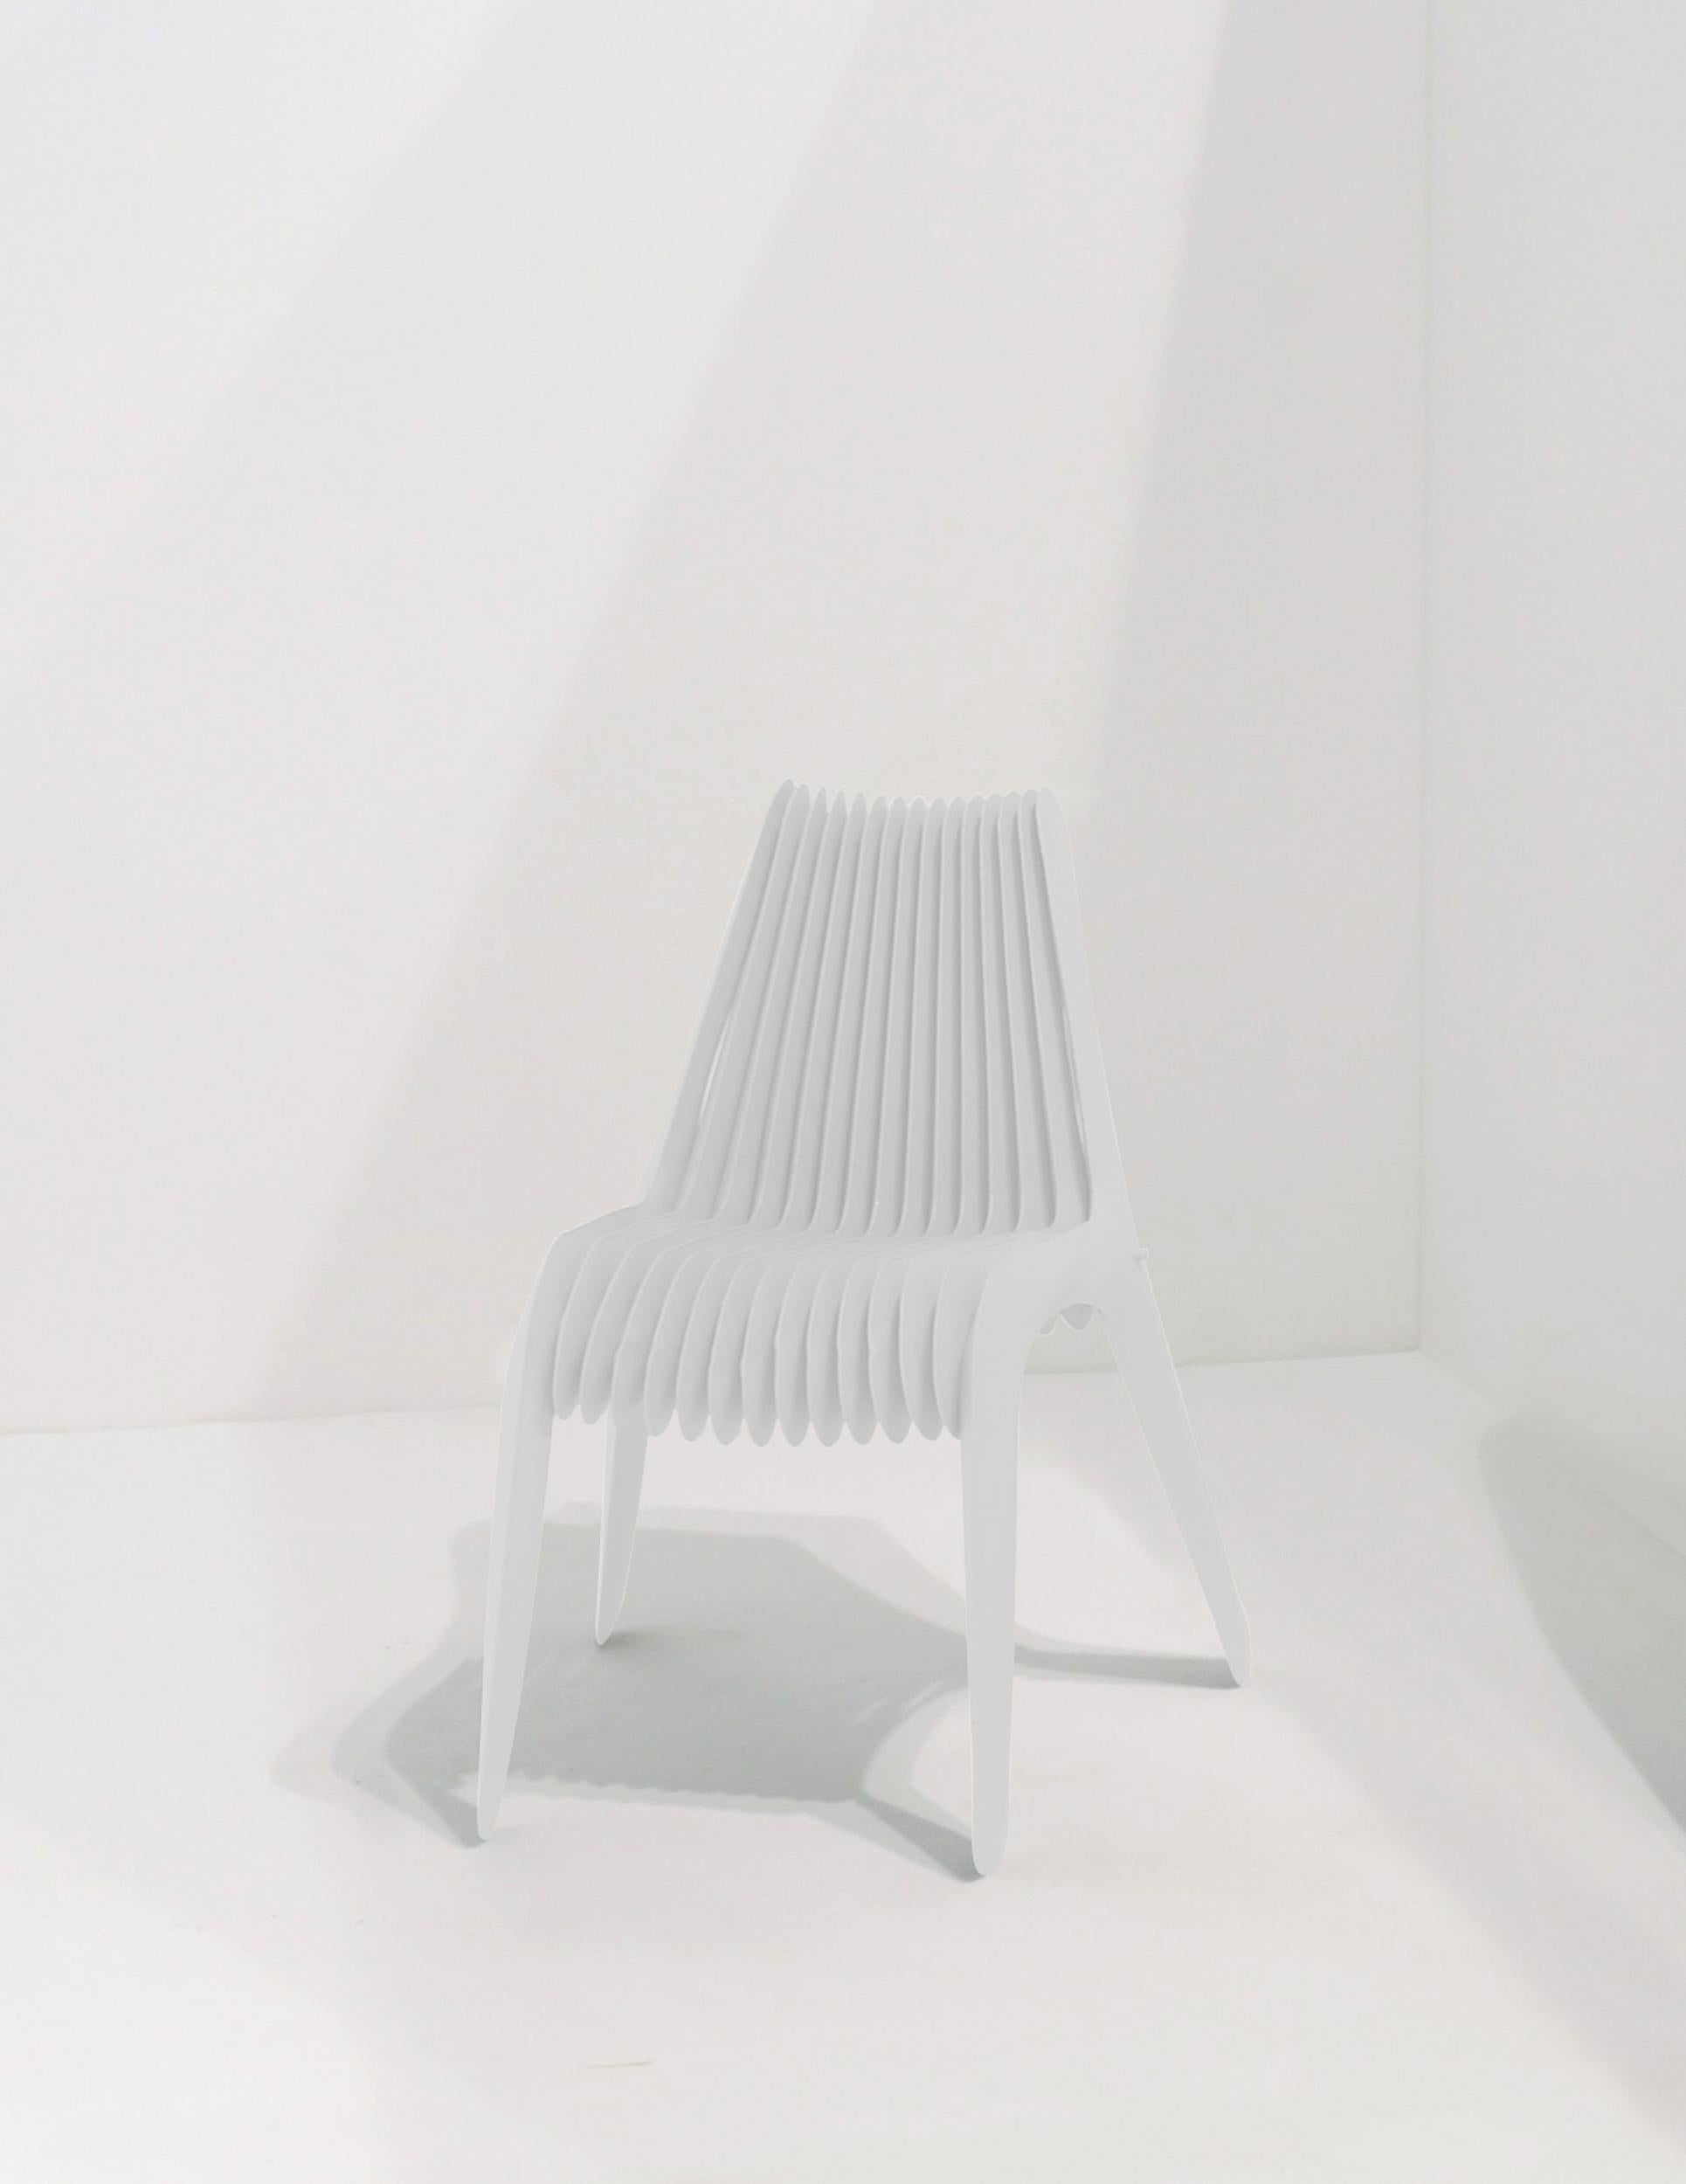 Painted Steel in Rotation Chair by Zieta, White Matt, Carbon Steel For Sale